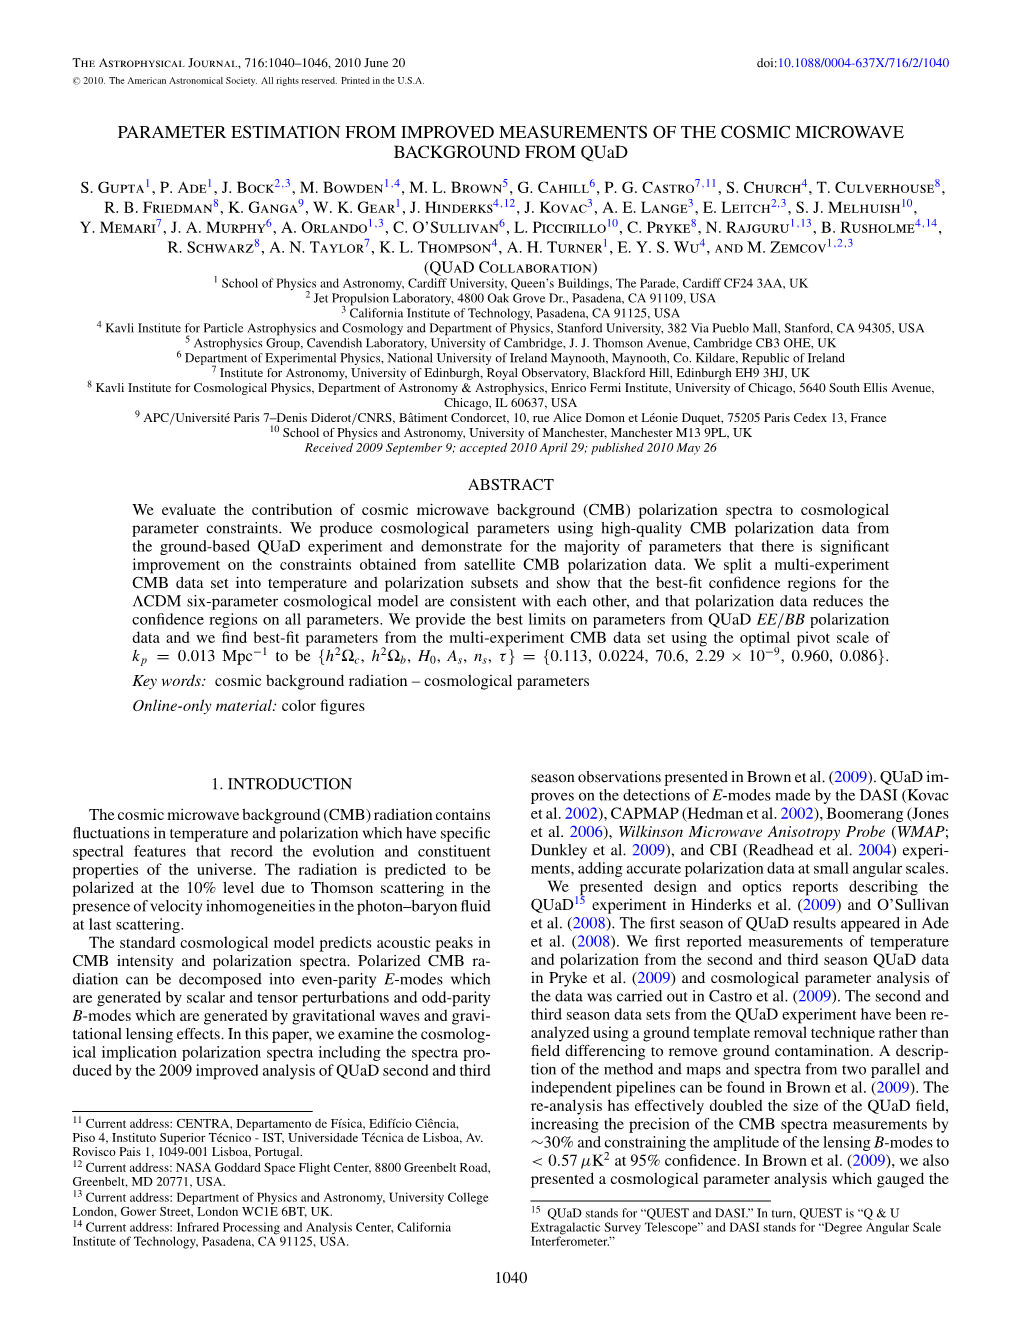 PARAMETER ESTIMATION from IMPROVED MEASUREMENTS of the COSMIC MICROWAVE BACKGROUND from Quad